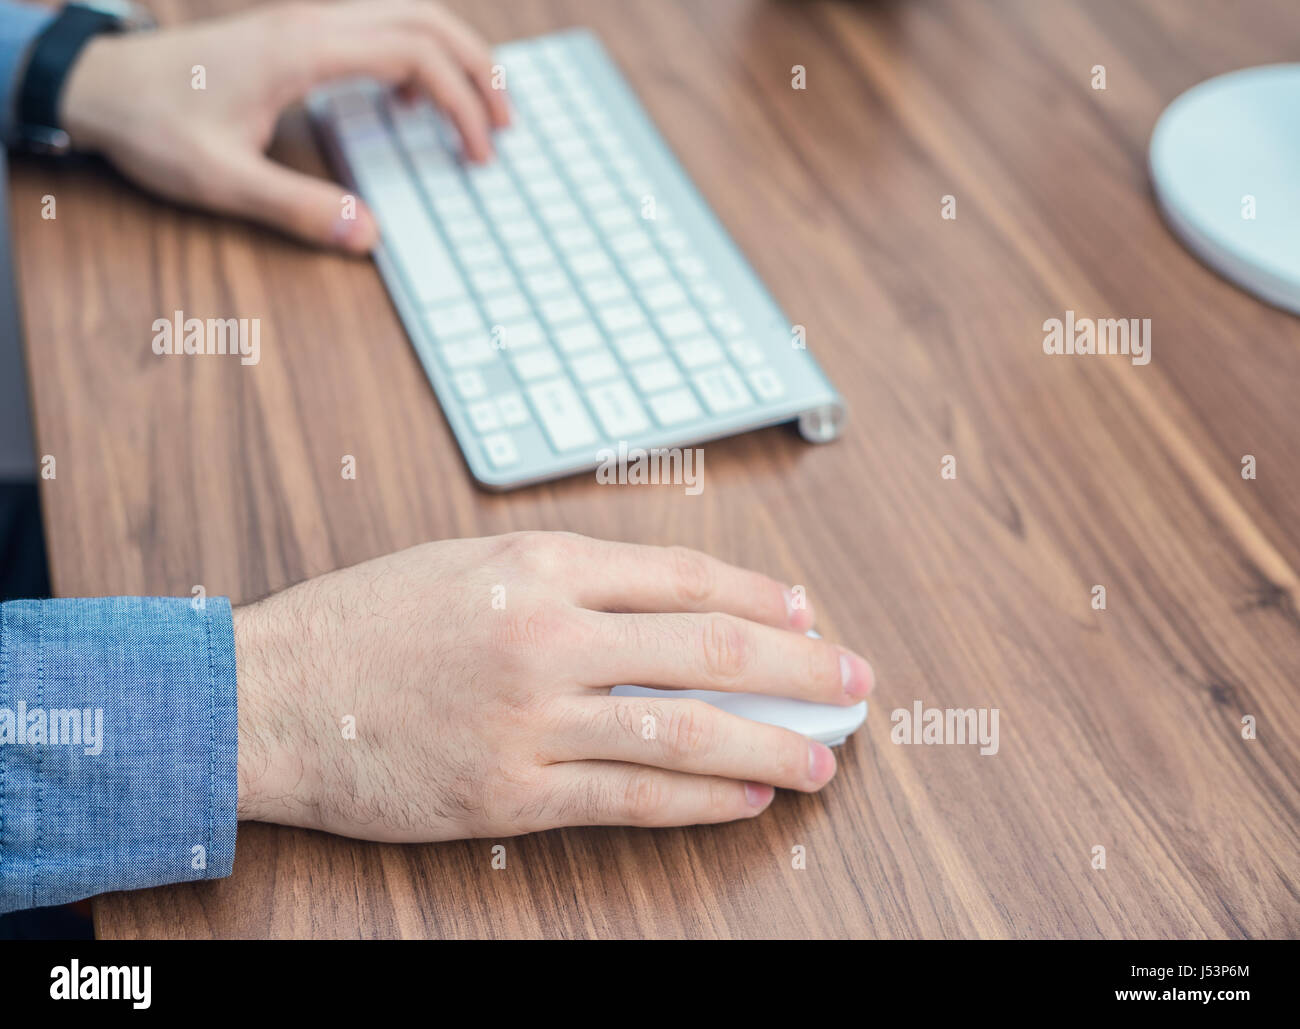 Hands typing on wireless keyboard on wooden table Stock Photo